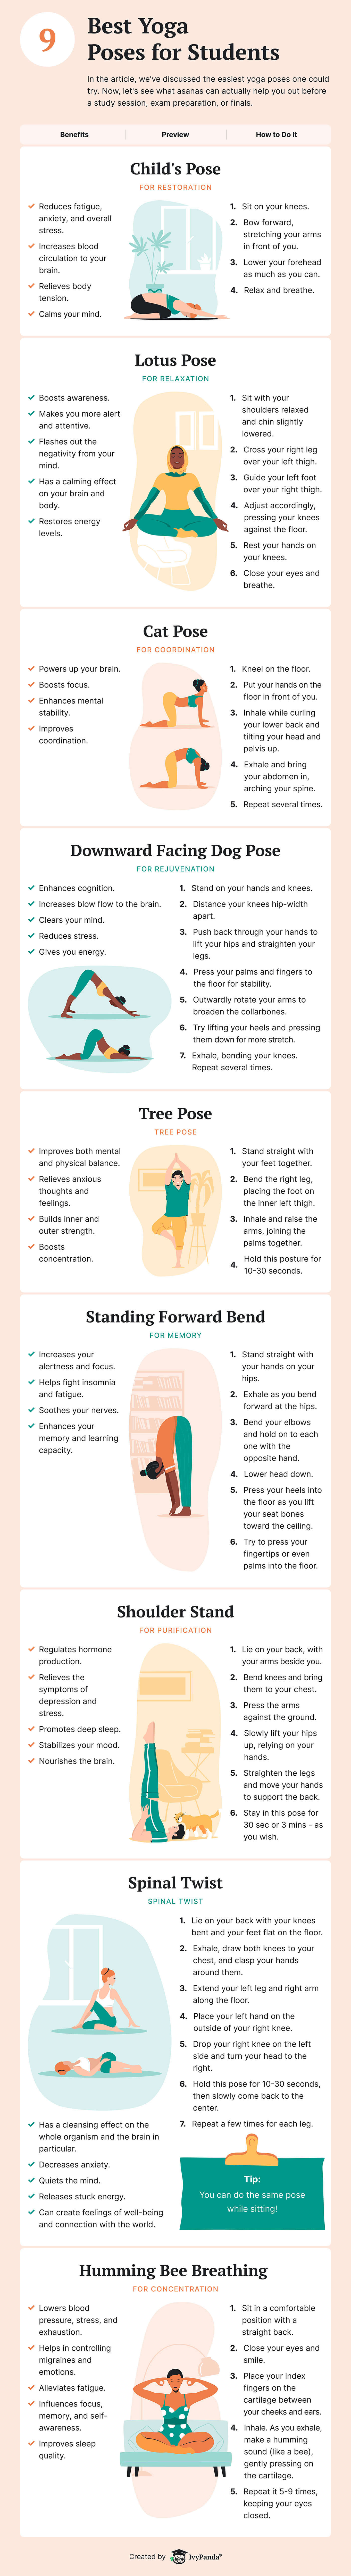 Infographic Describe Best Yoga Poses for Students.